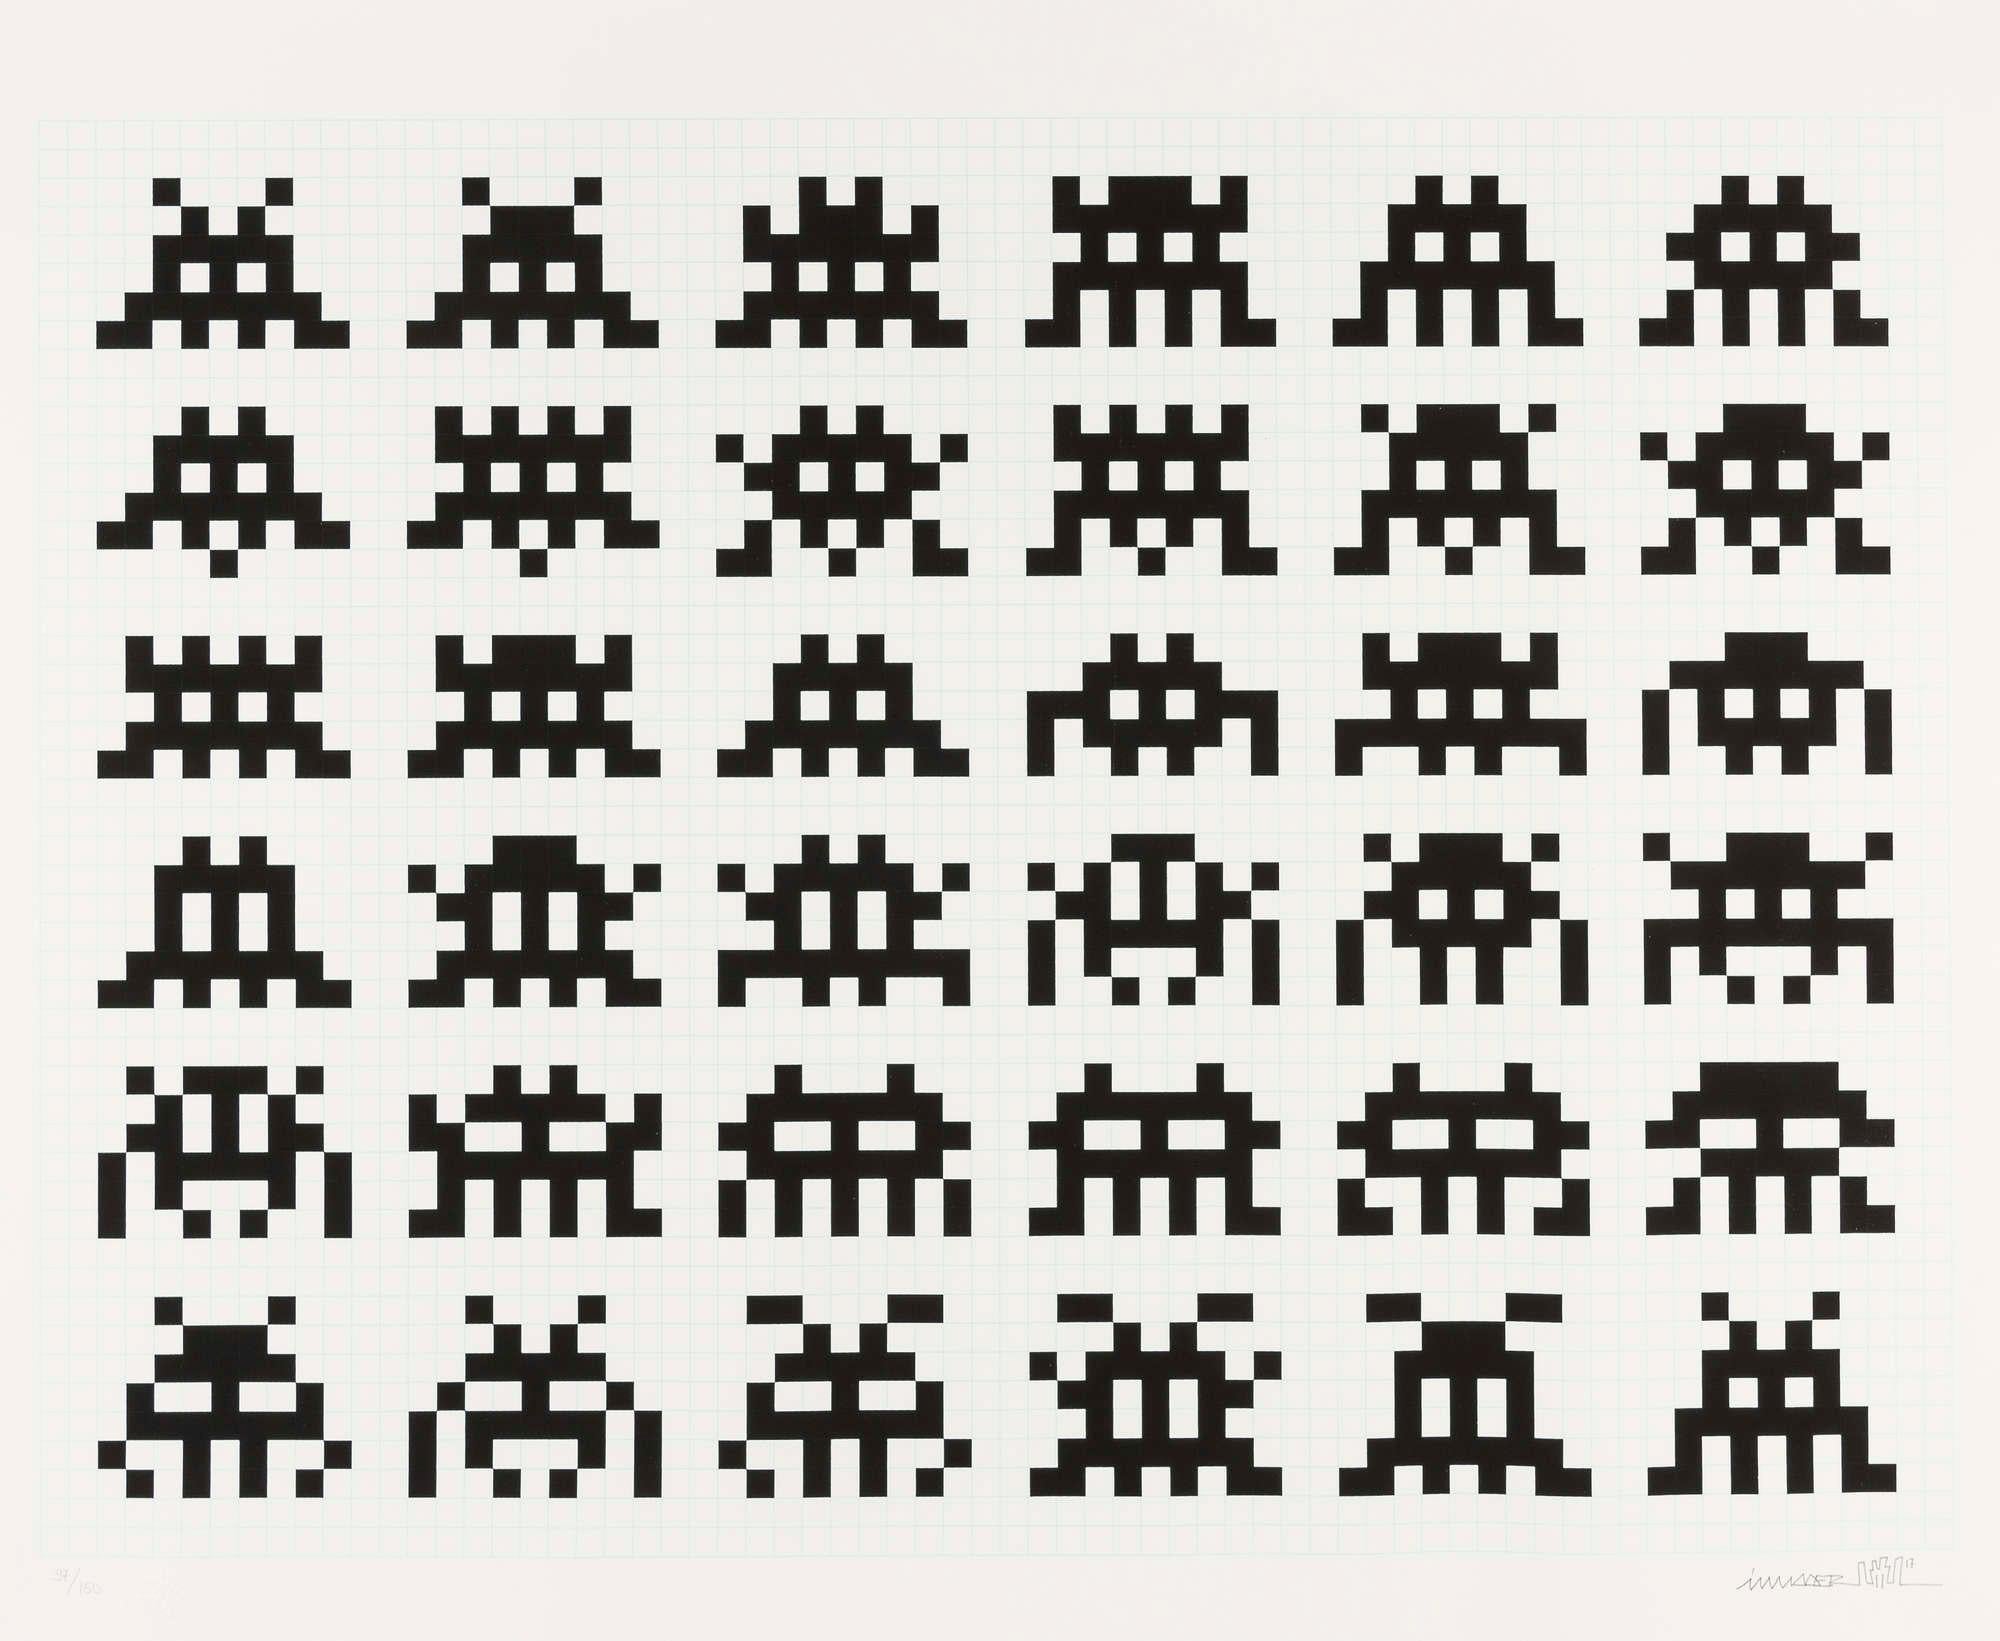 Invader Abstract Print - Repetition Variation Evolution - Contemporary Art, Urban, Street Art, Space